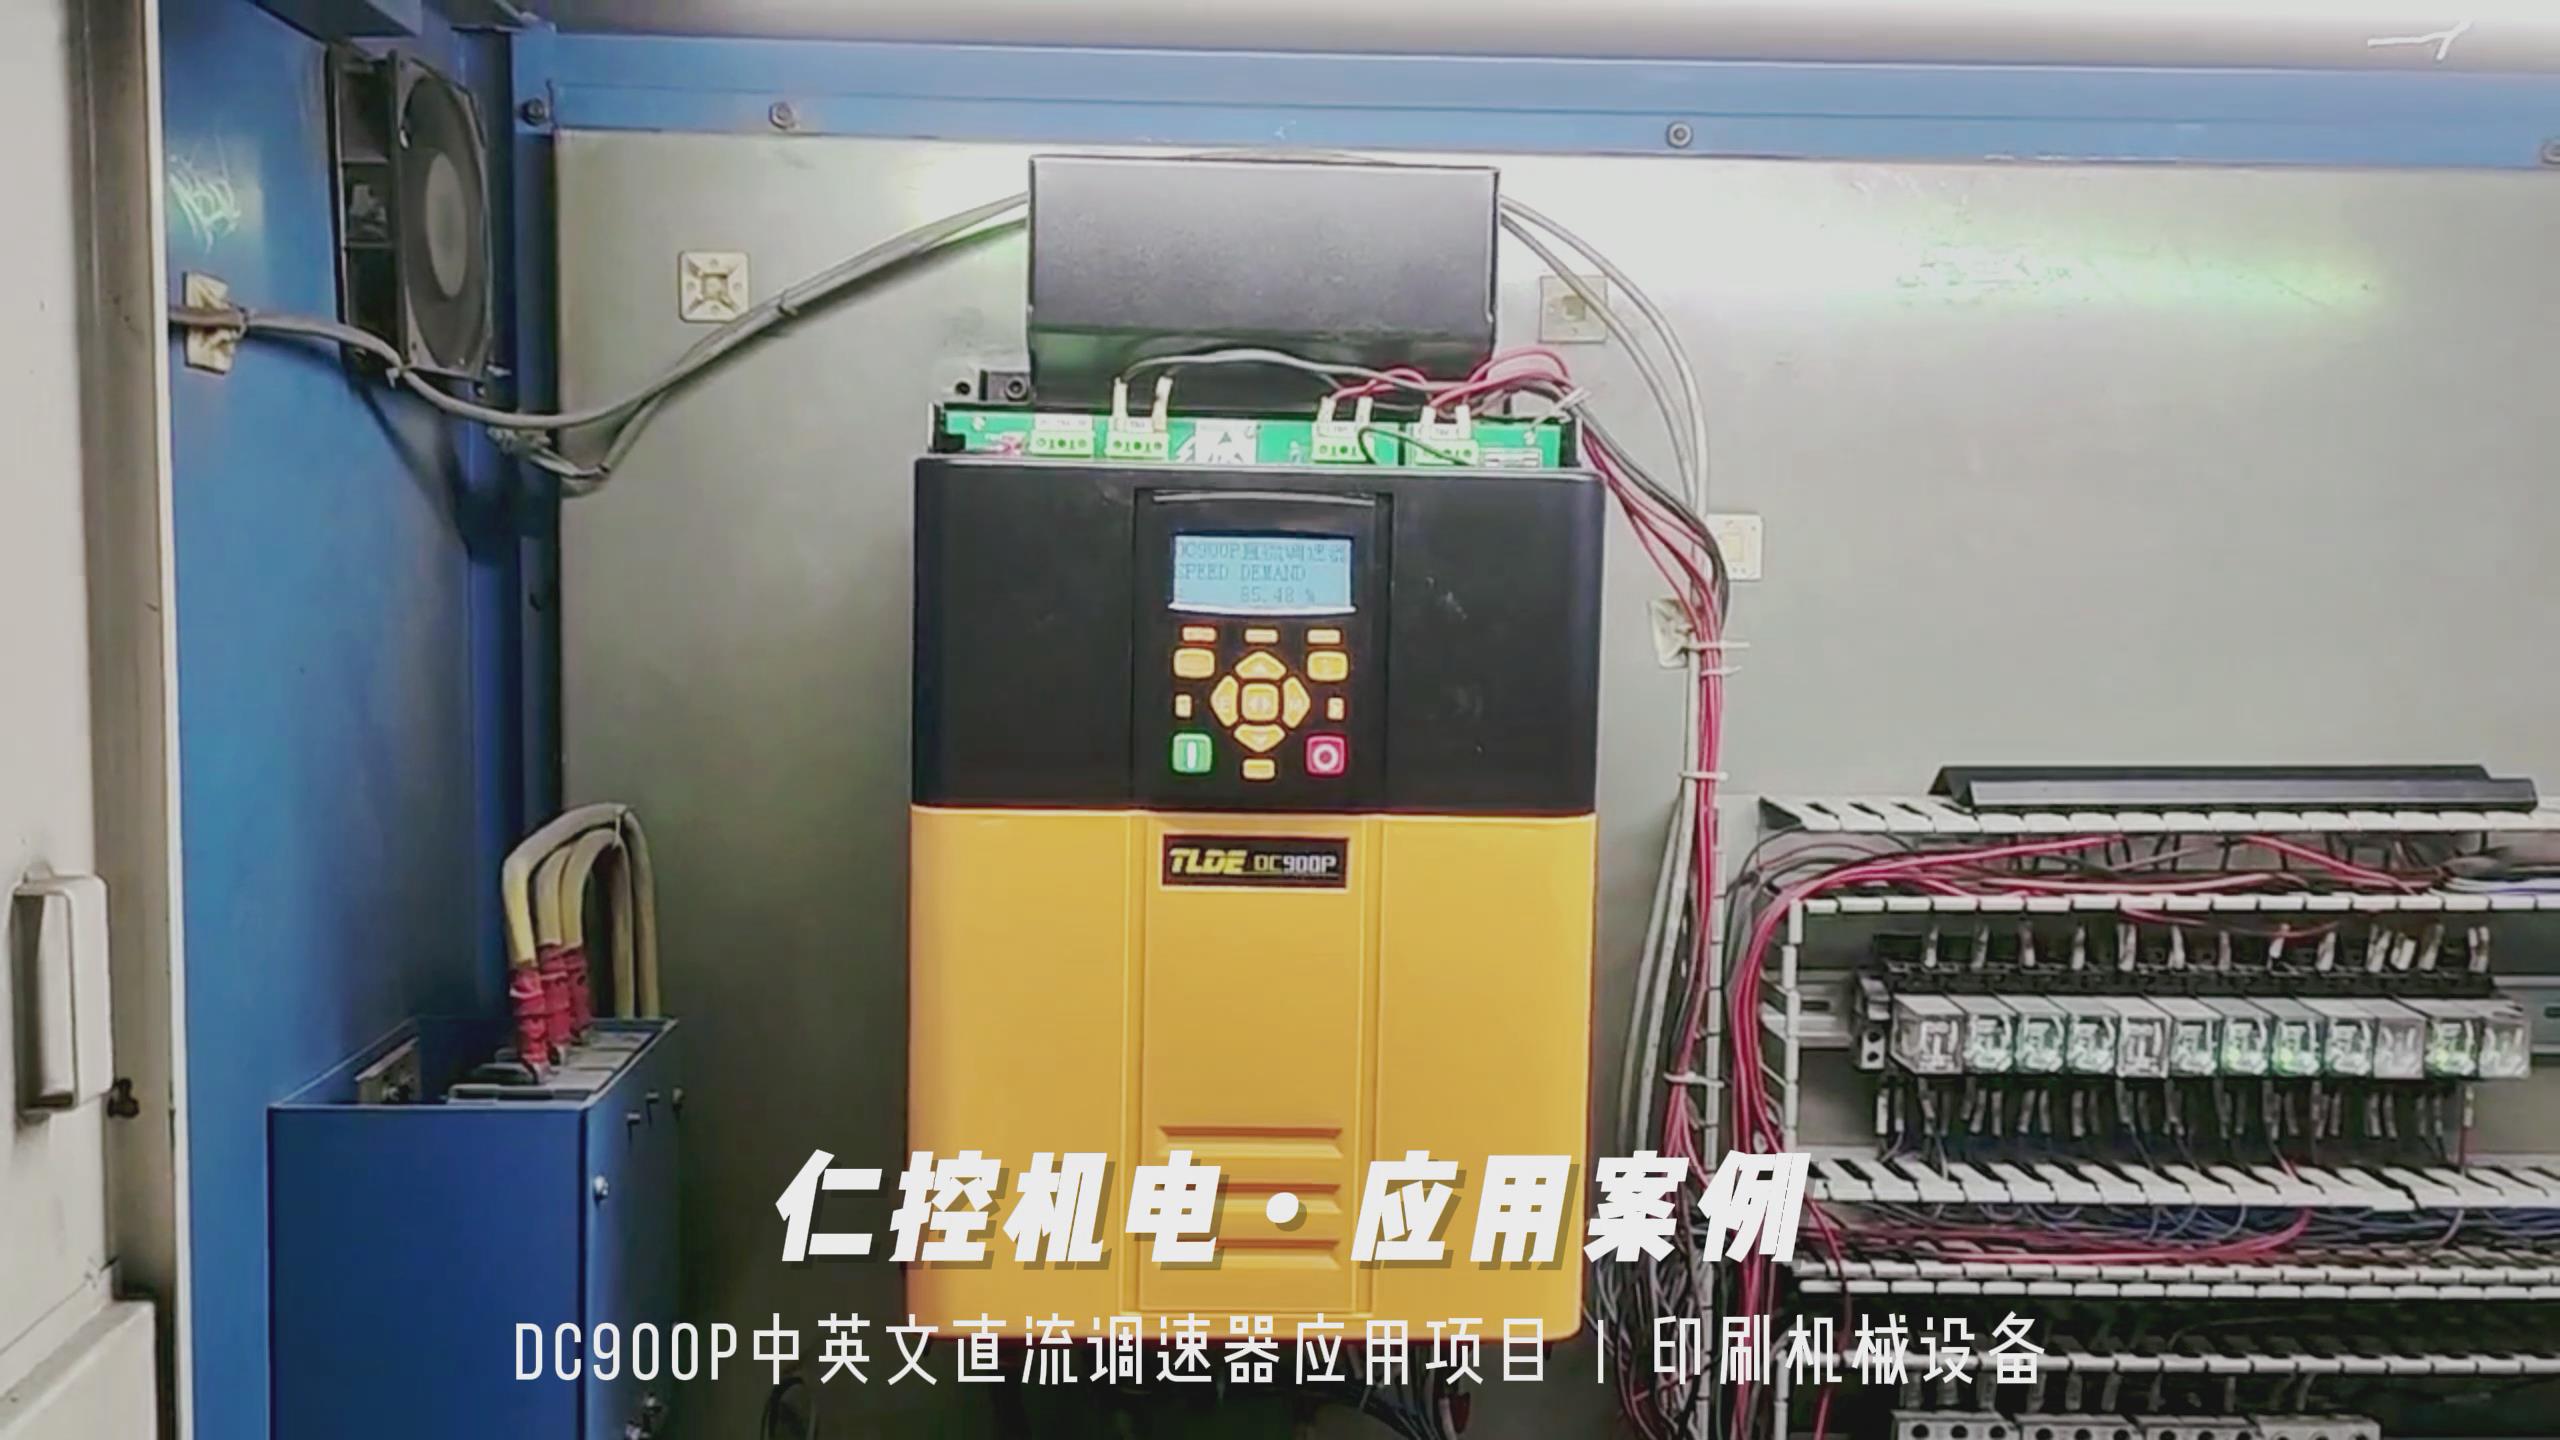 DC900P DC Drive applied to printing machinery!